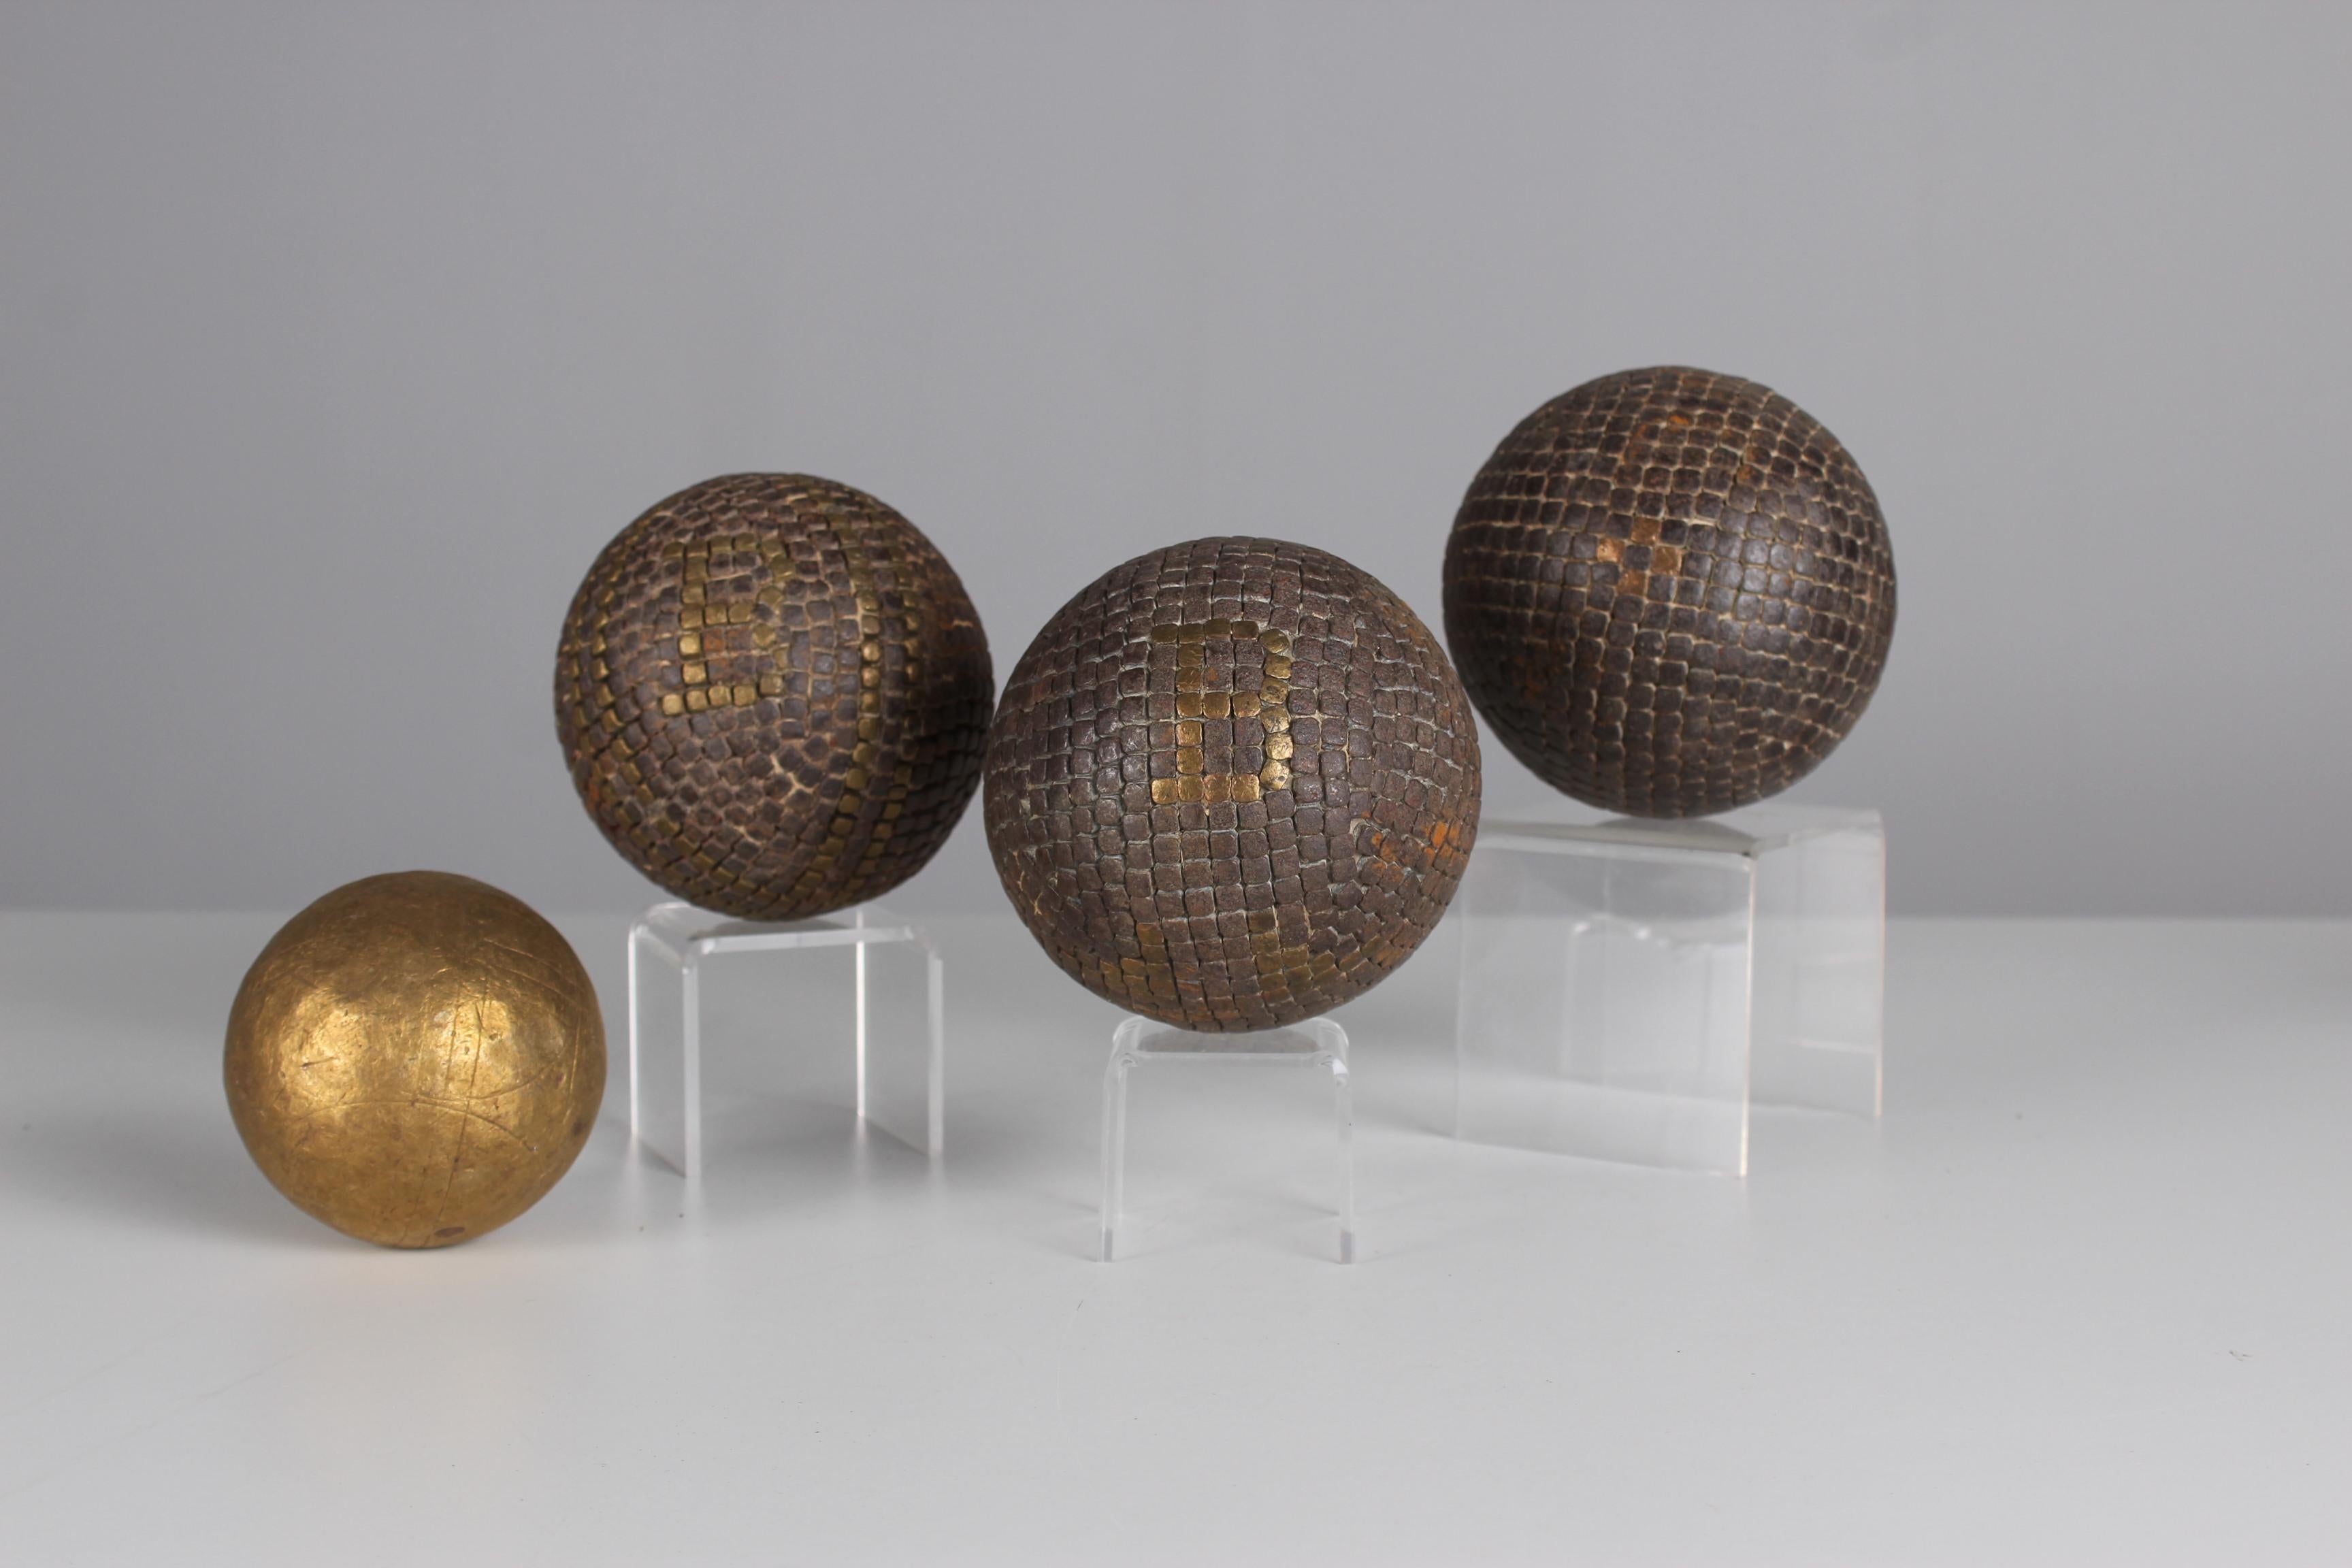 Beautiful, unique Boule set of three Boule balls and one target ball, France, late 19th century.

In the 19th century, the manufacture of boules balls underwent significant development in France as the game of boules, particularly the pétanque